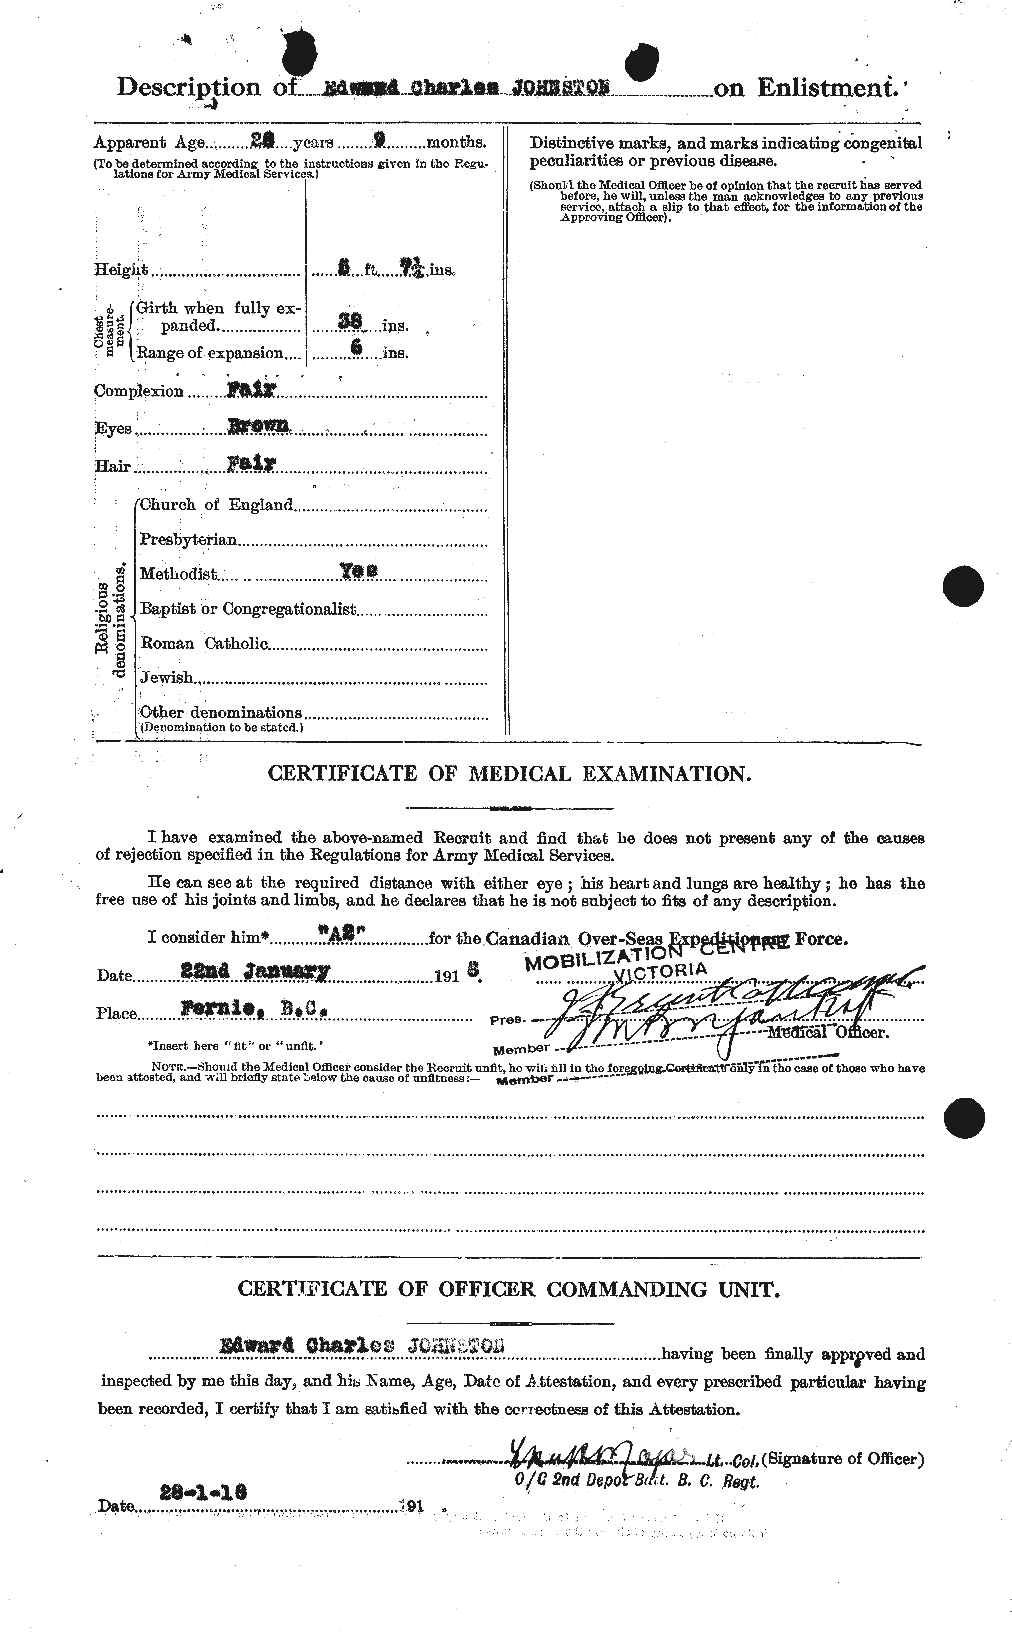 Personnel Records of the First World War - CEF 423225b